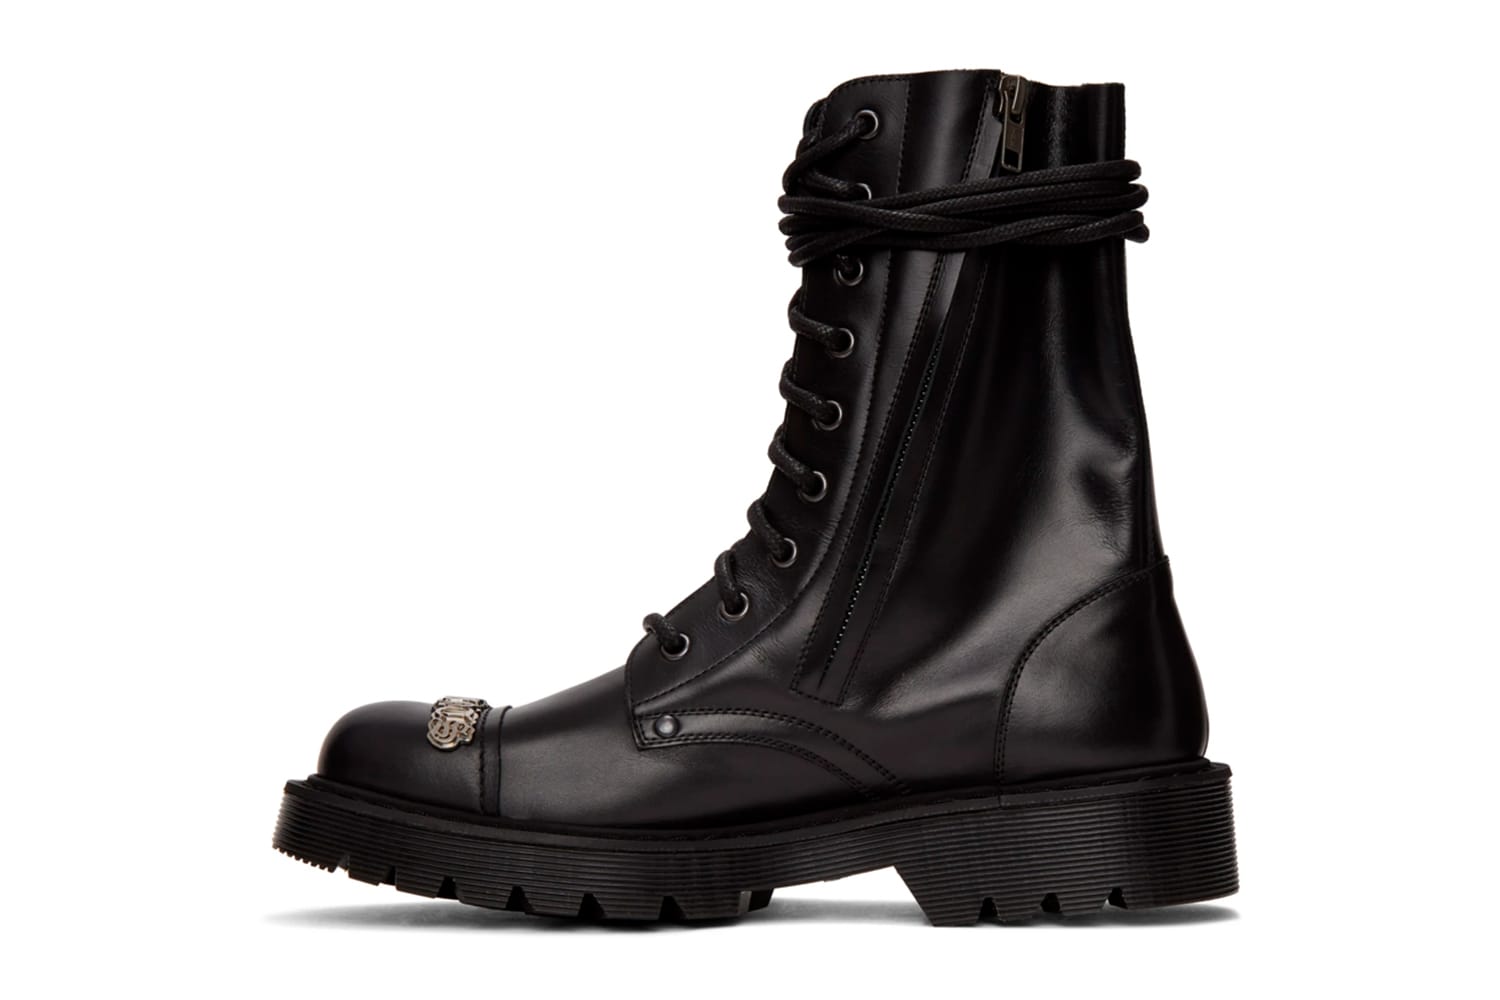 where to buy combat boots near me